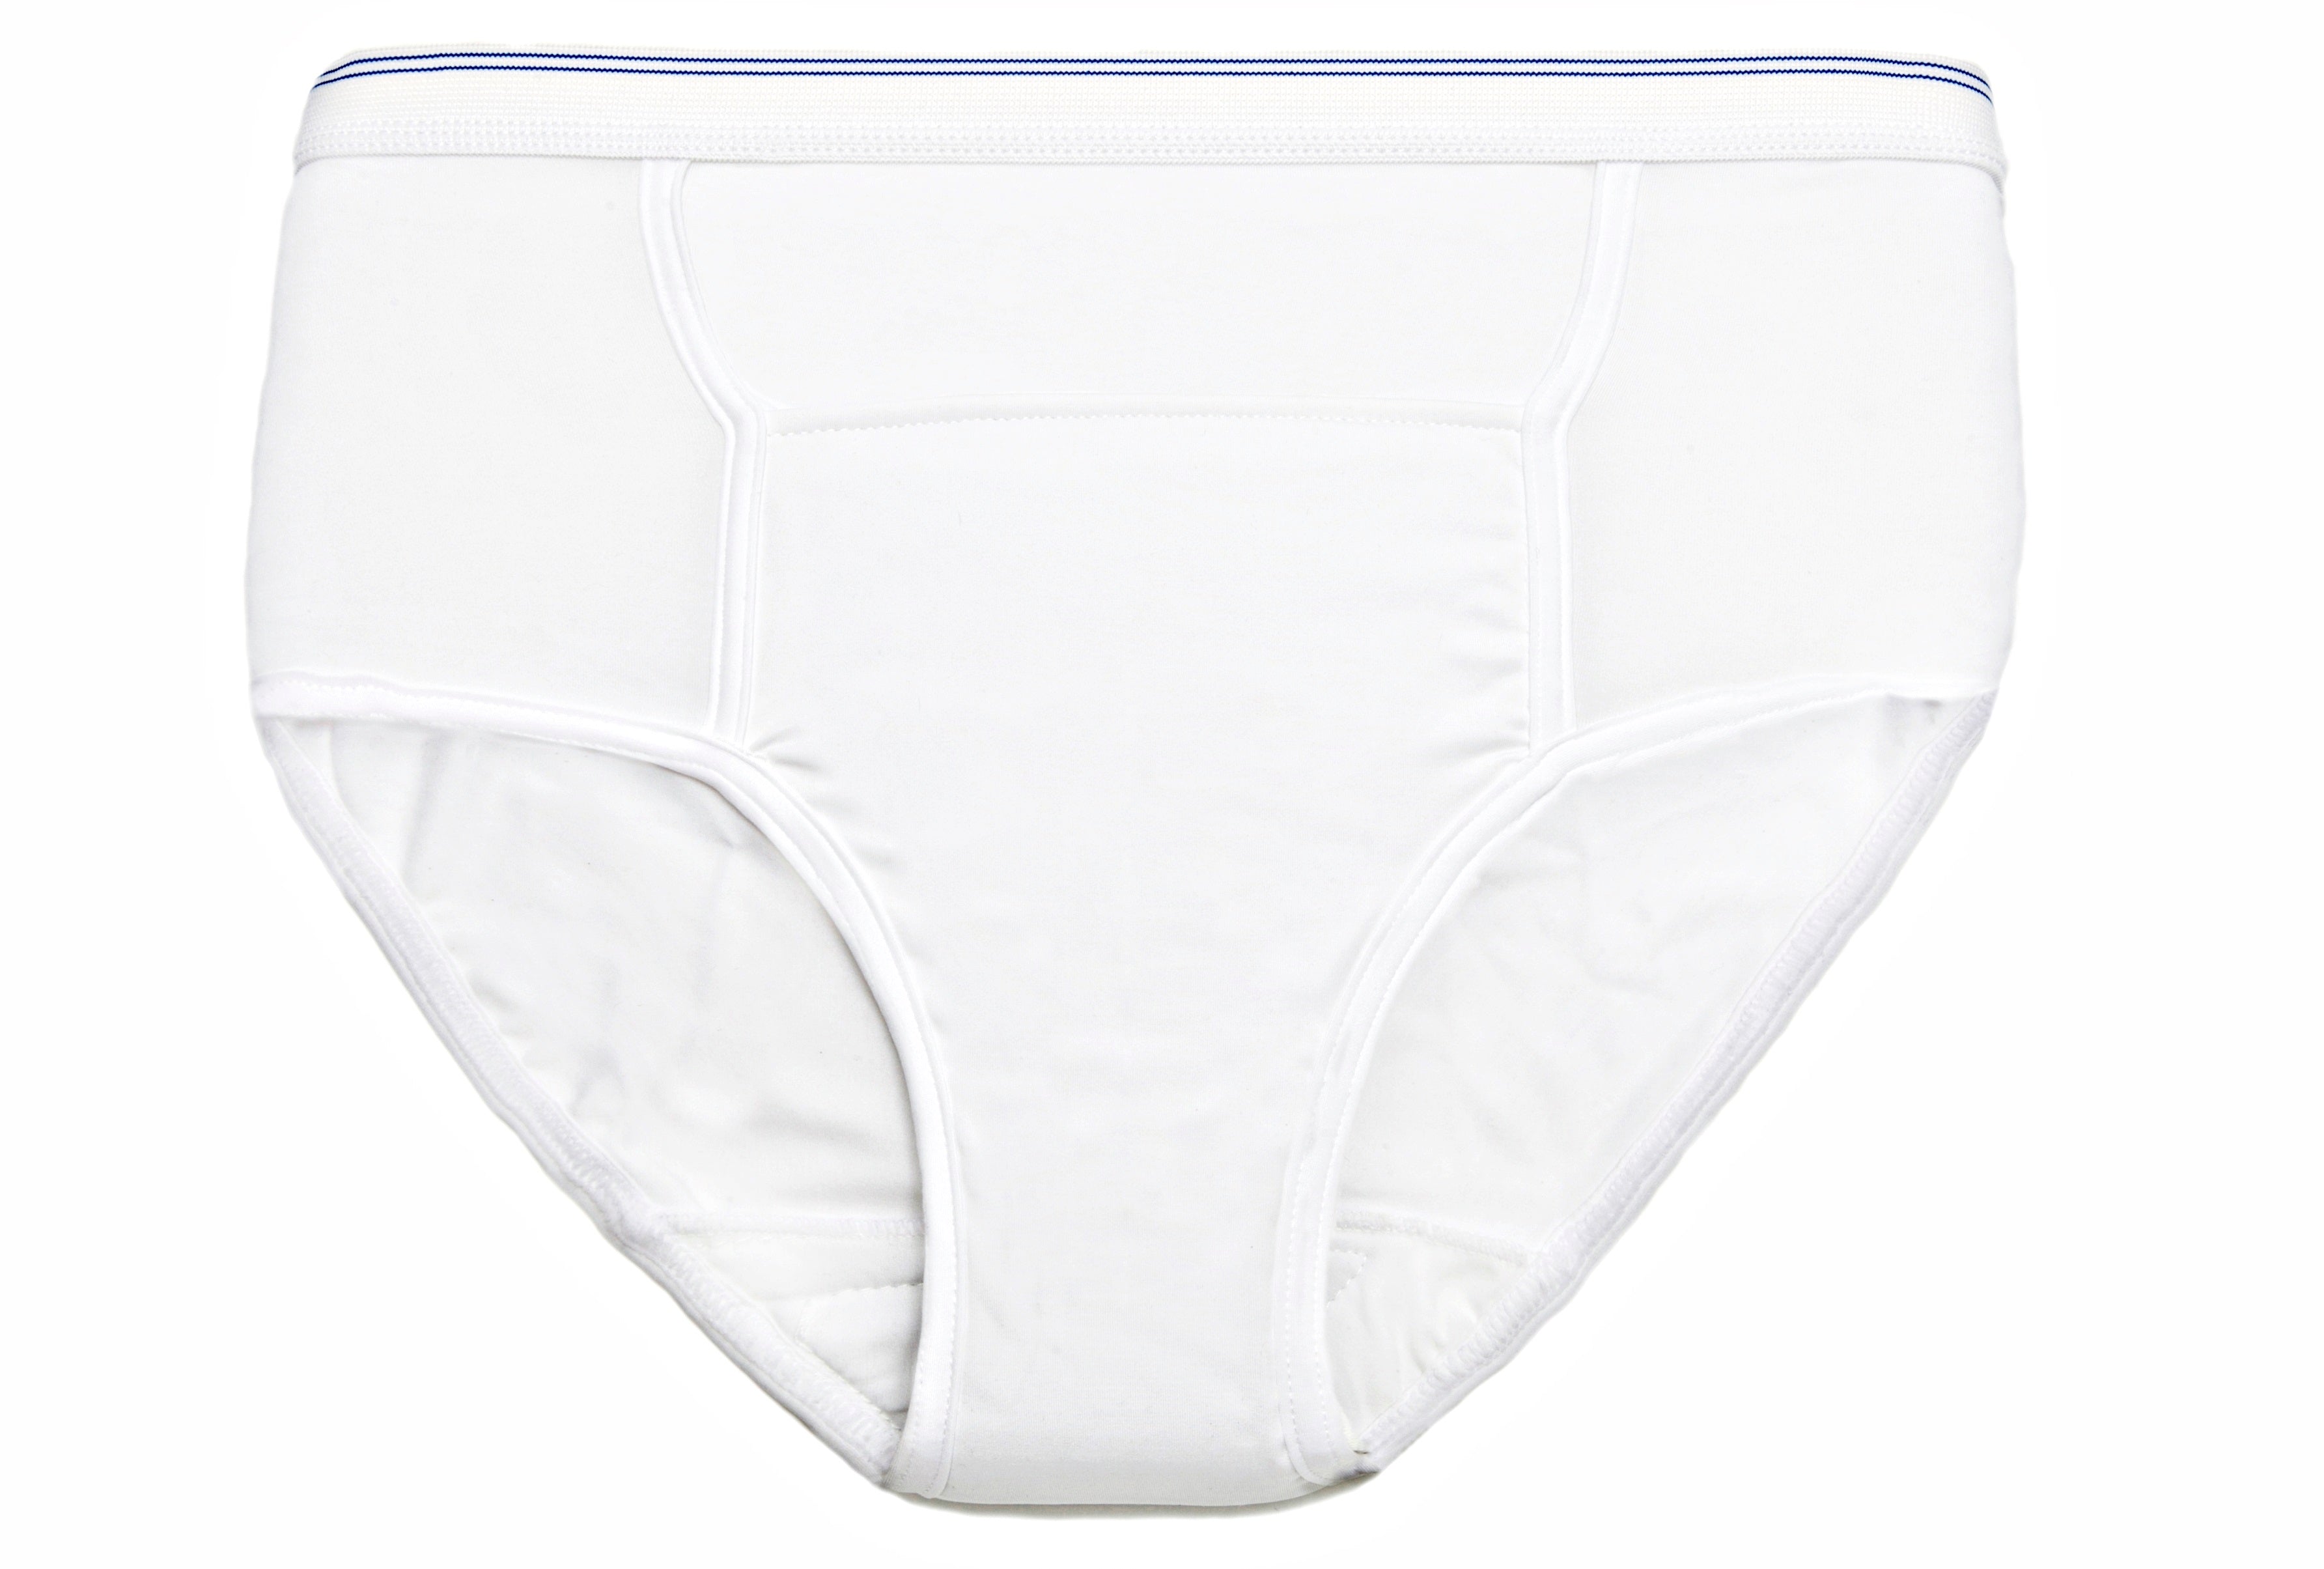 2 Pack Men Incontinence Underwear, Reusable Washable Urinary Incontinence  Briefs for Prostate Surgical, Elder, Long Driving (White, 2X-Large)